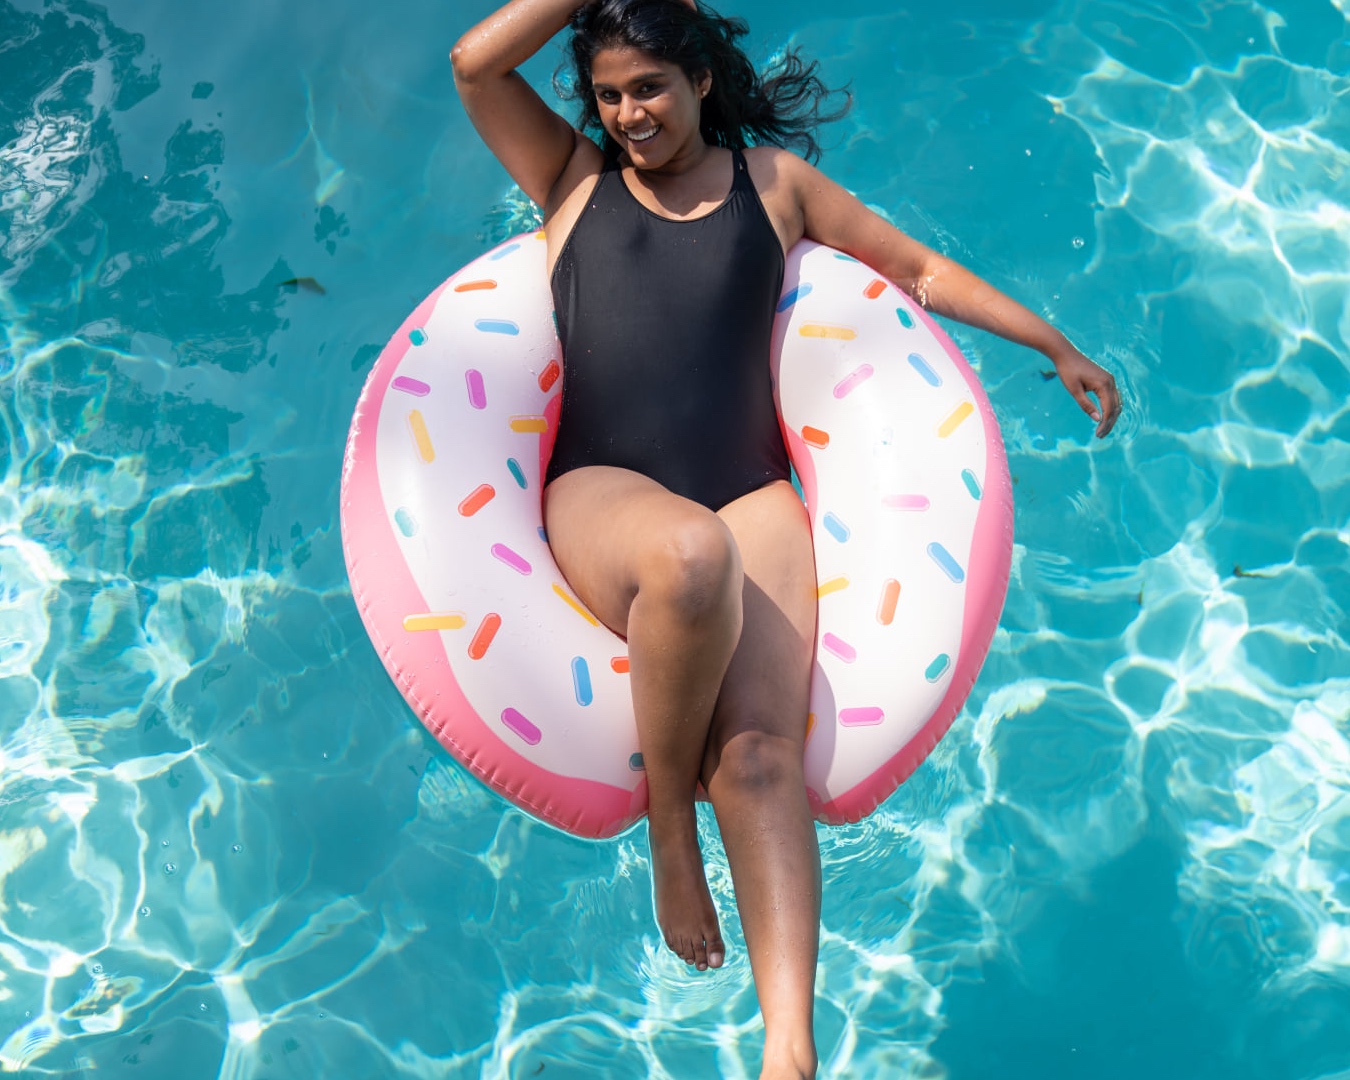 A woman in a black one piece relaxes on a blow up doughnut in a pool.